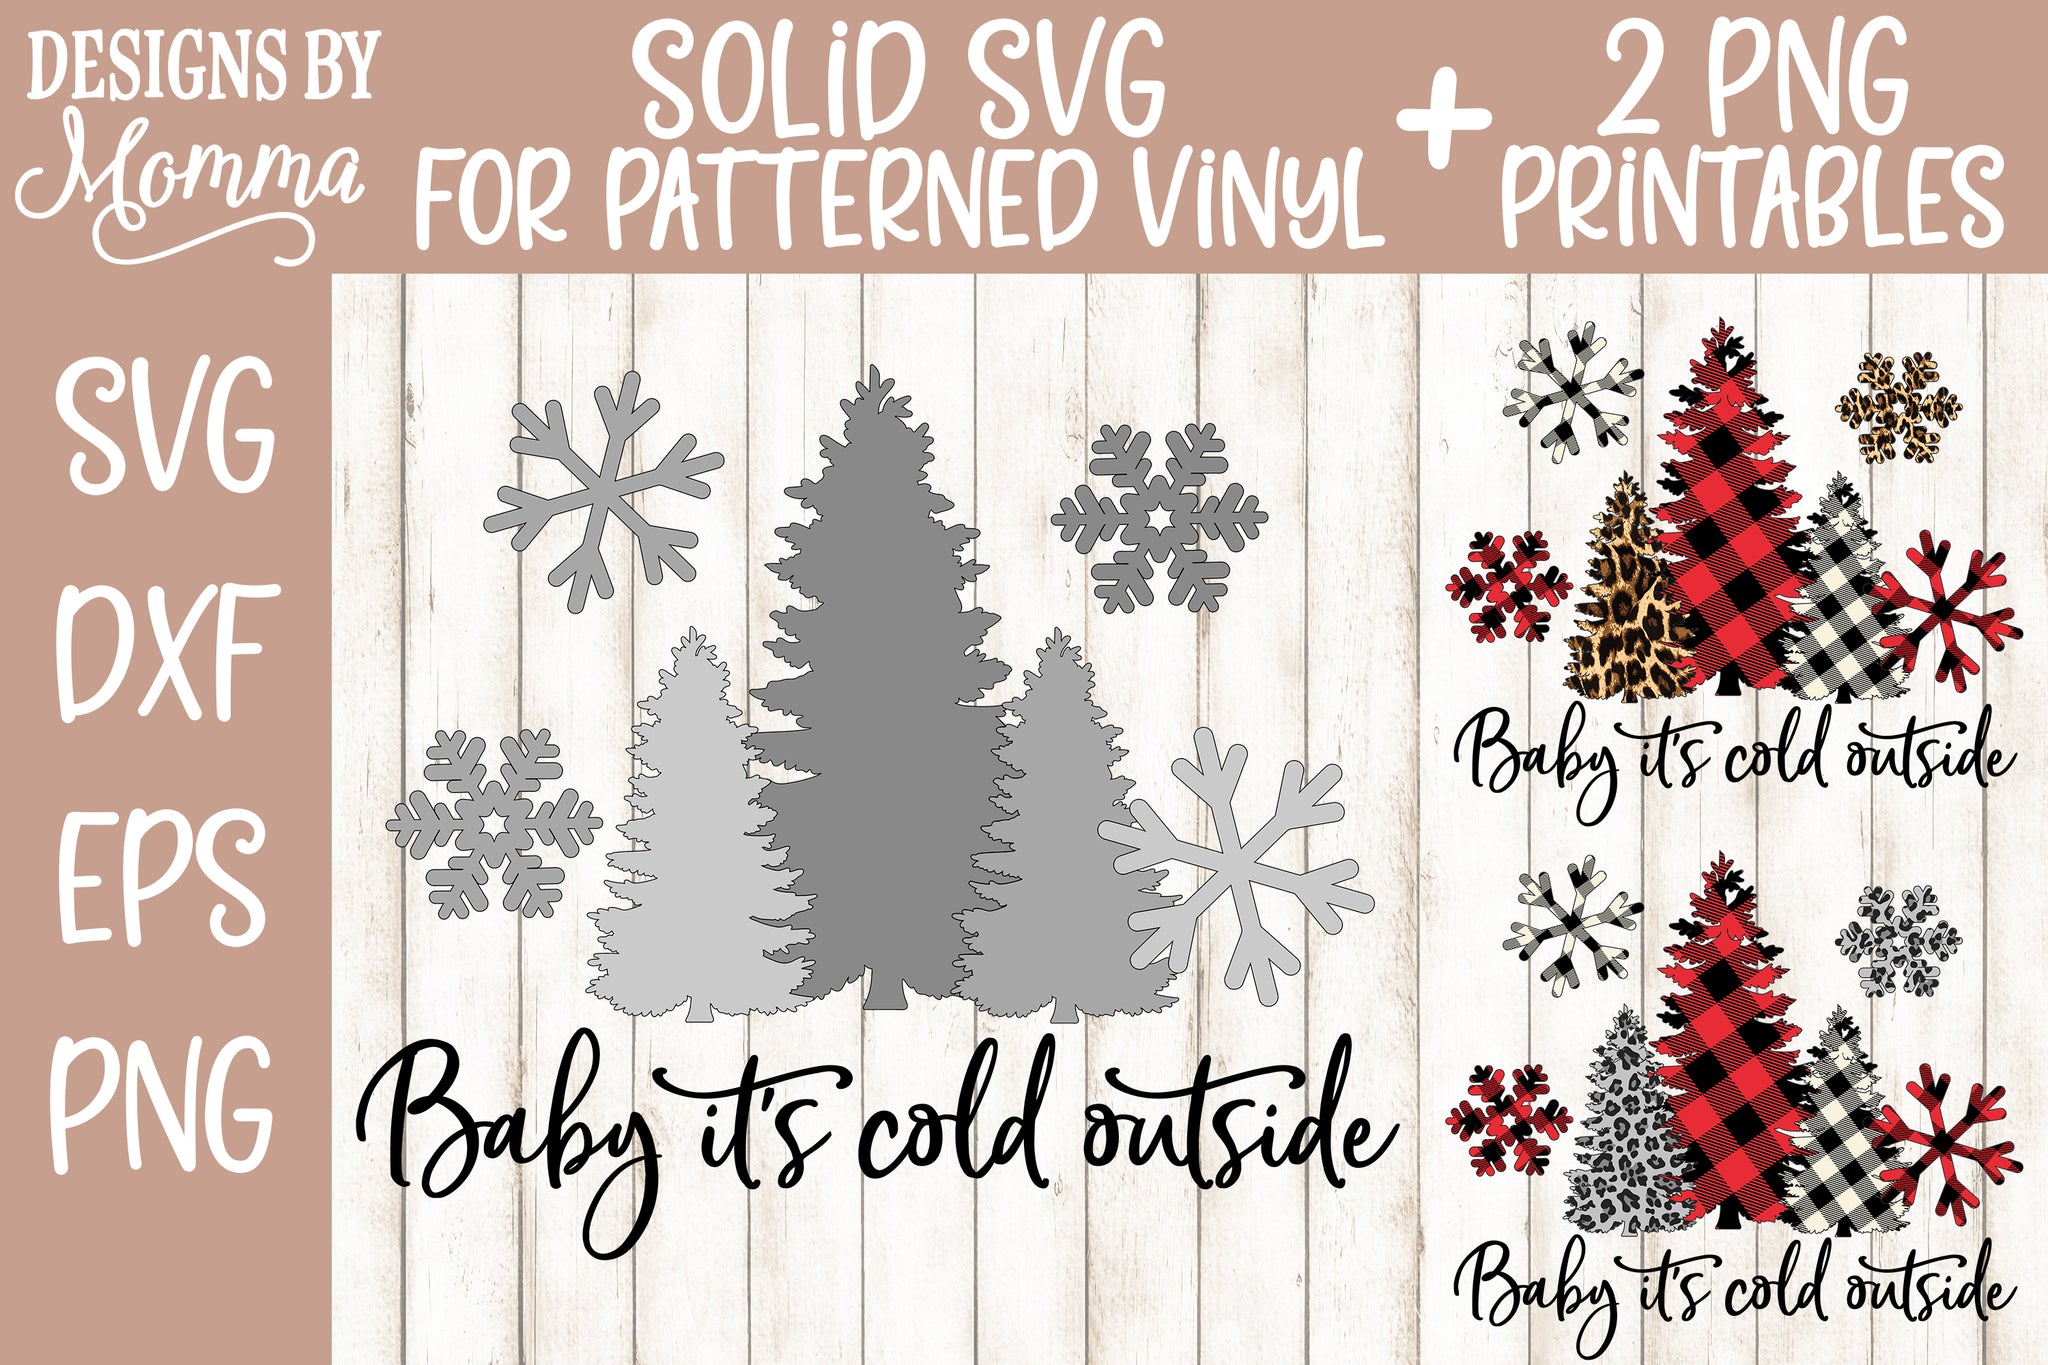 Download Baby It S Cold Outside Printable Sub Png Plus Svg For Patterned Vinyl Designs By Momma